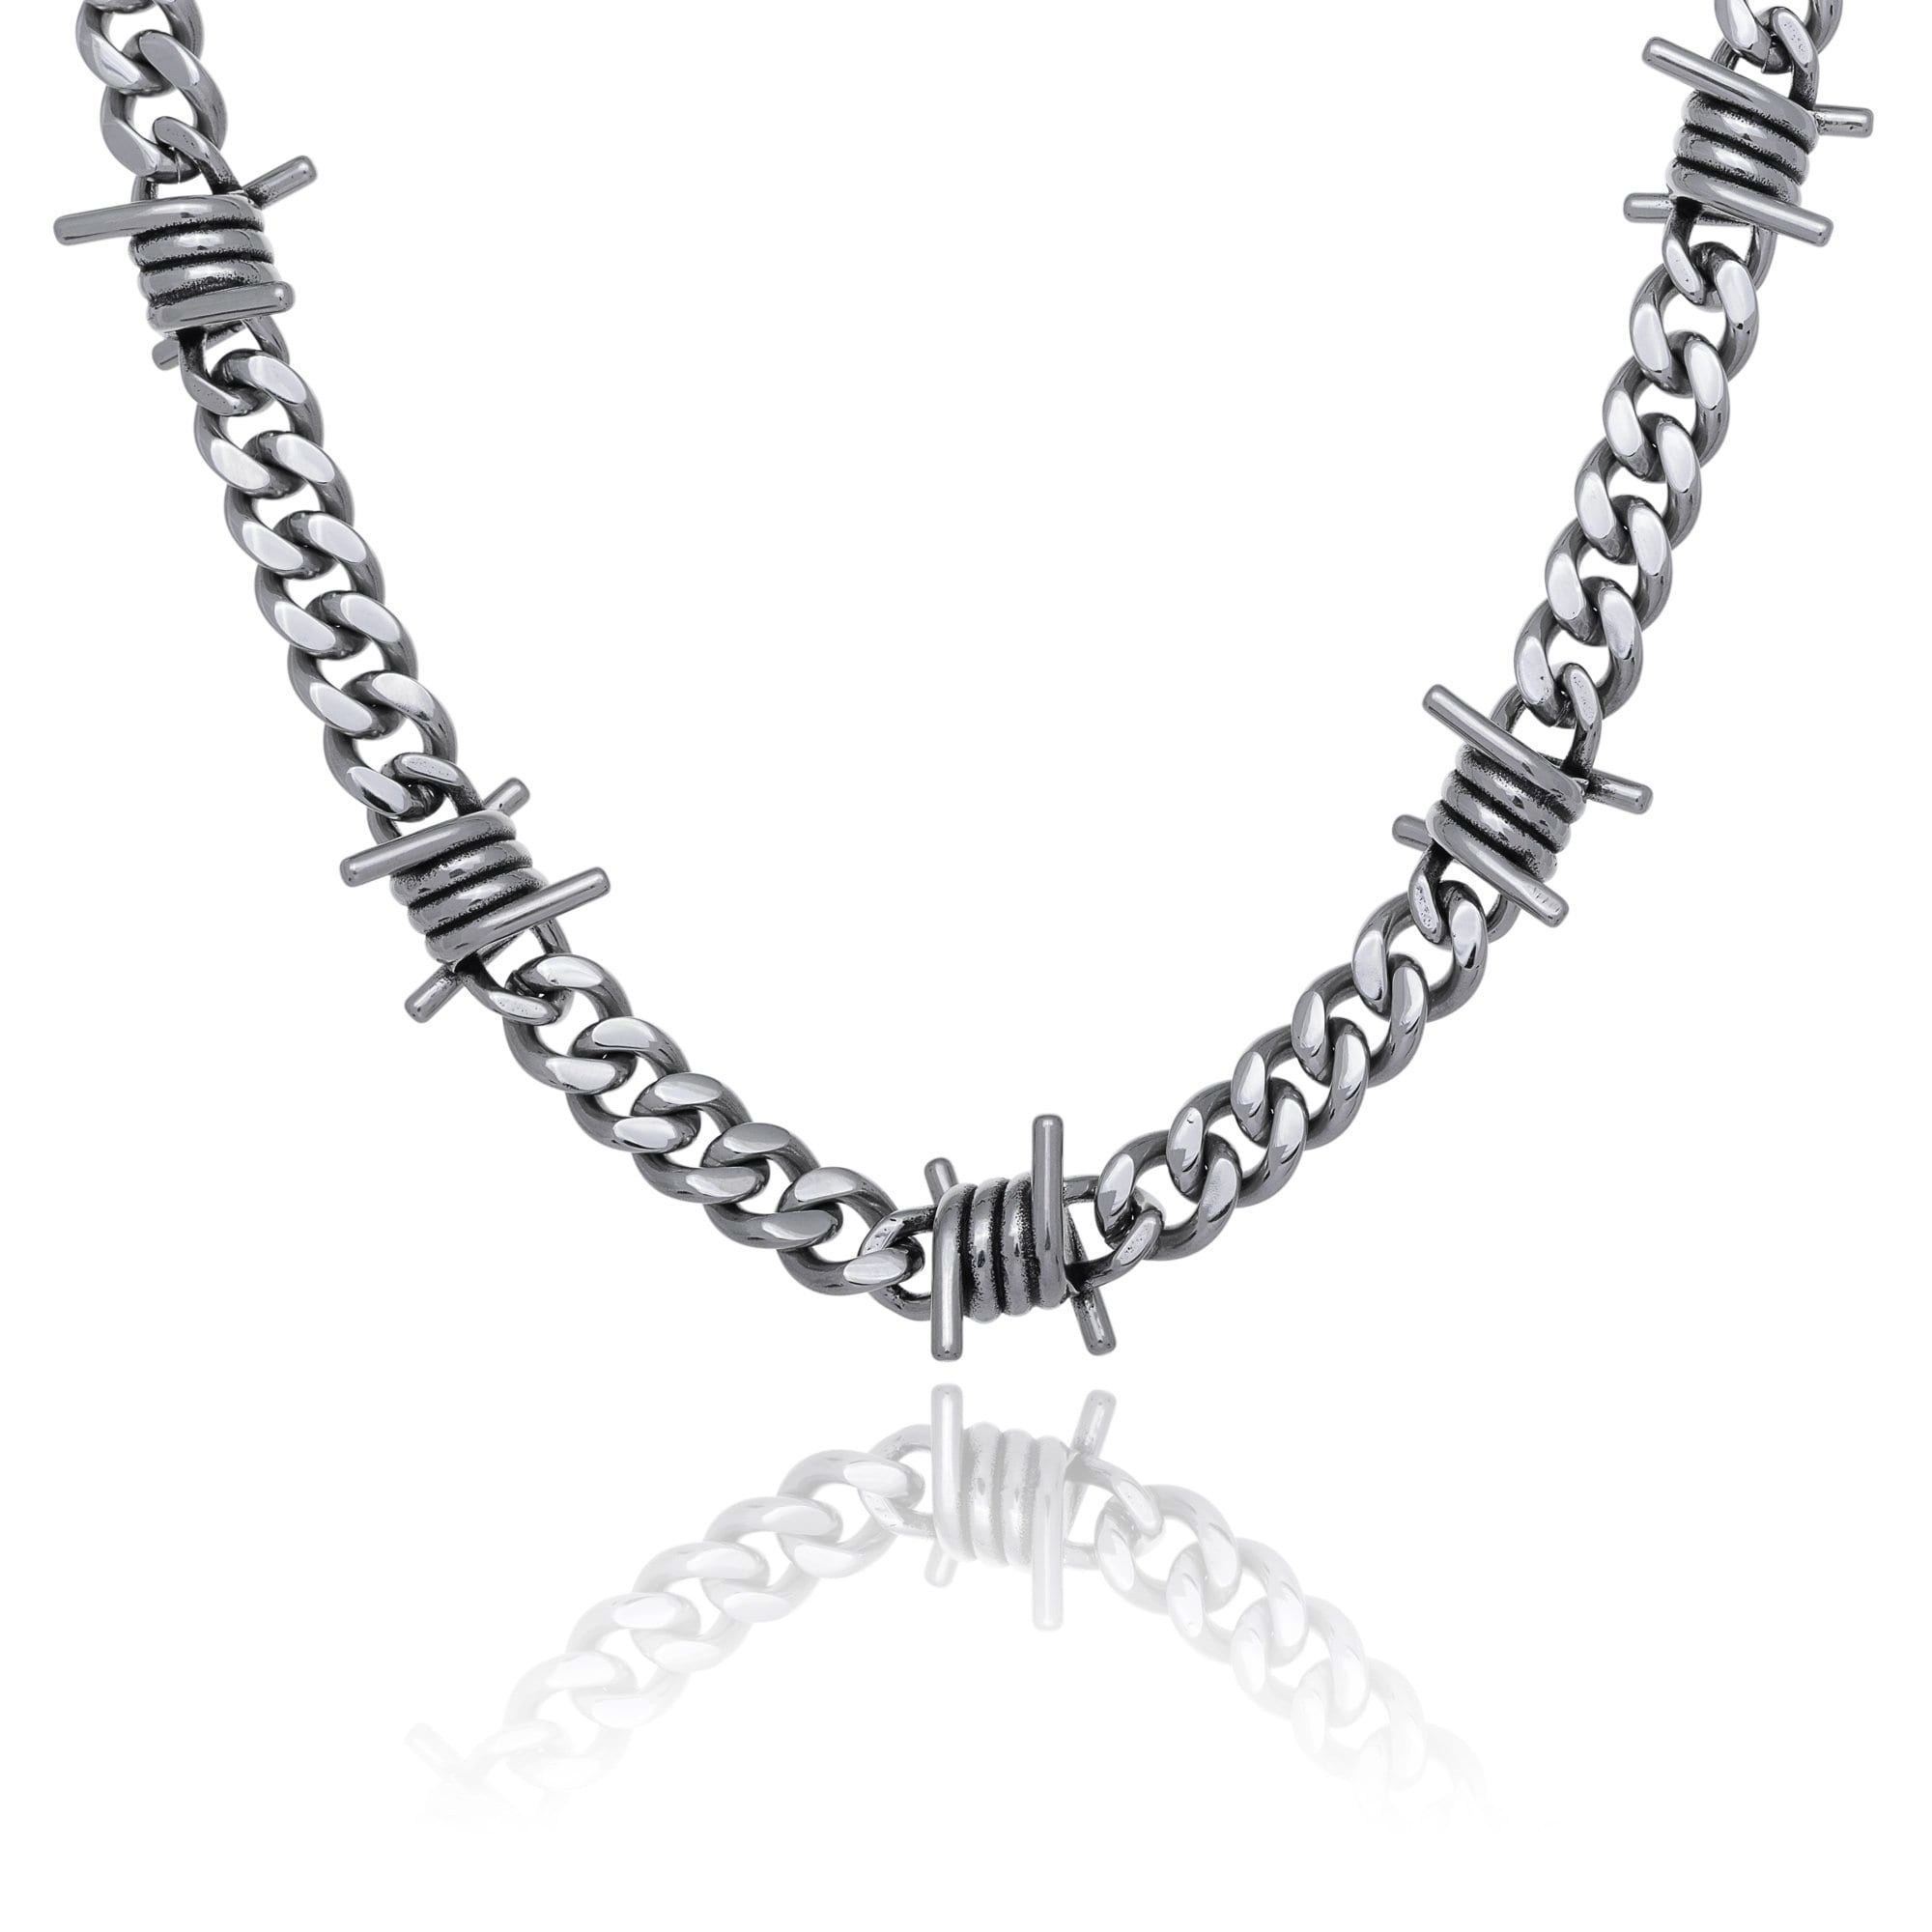 Barbed Wire Necklace Cuban Link Chain By Statement - Statement